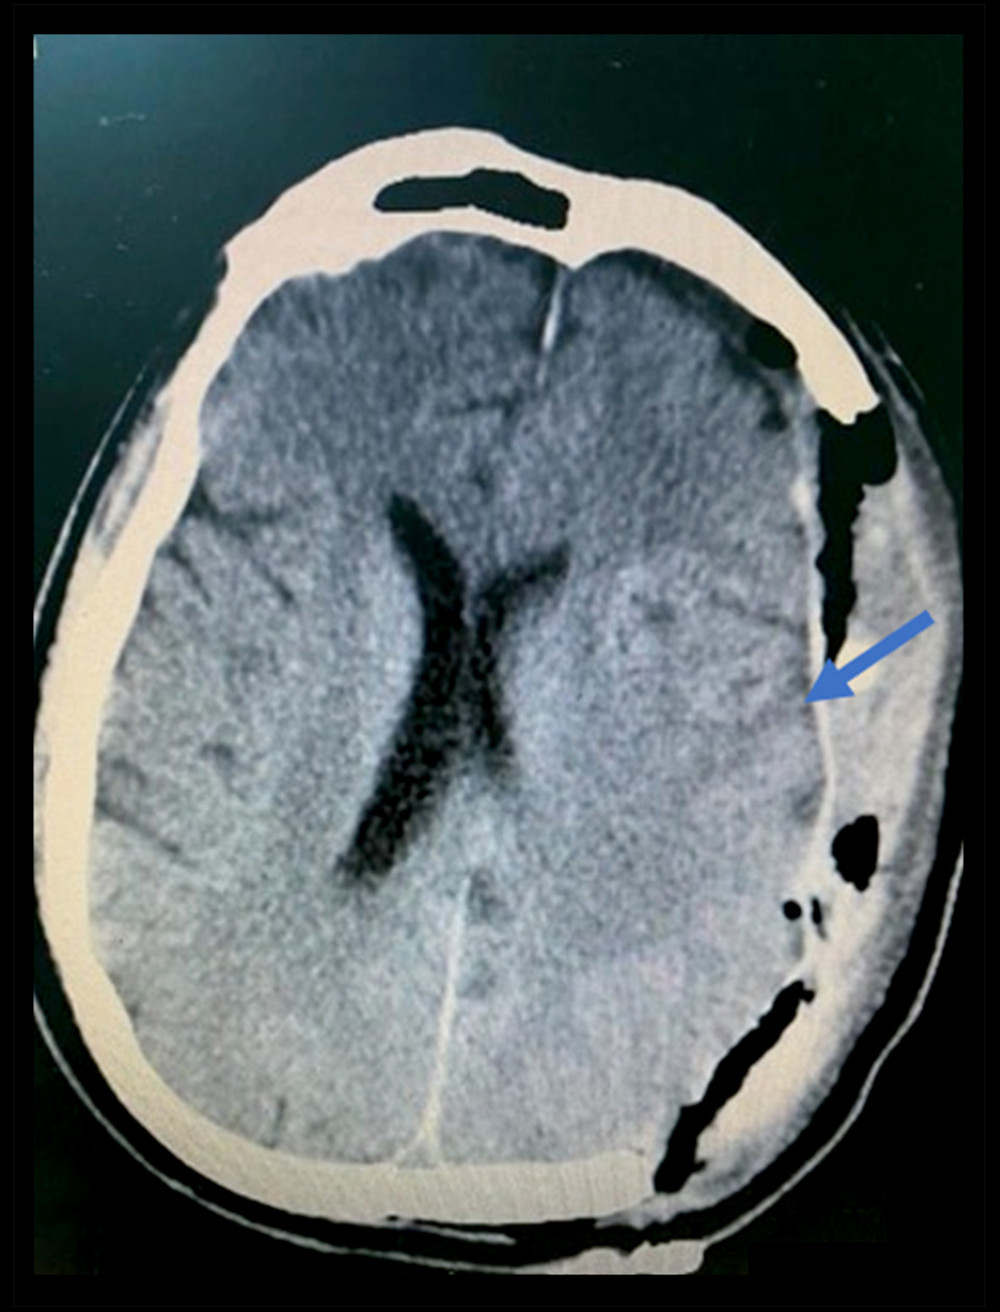 CT brain day 1 after the second evacuation of subdural hematoma and decompressive craniectomy. Description: significant improvement of left extra-axial hematoma (pointed in the image) with improvement of midline shift from 17 mm to 7 mm.